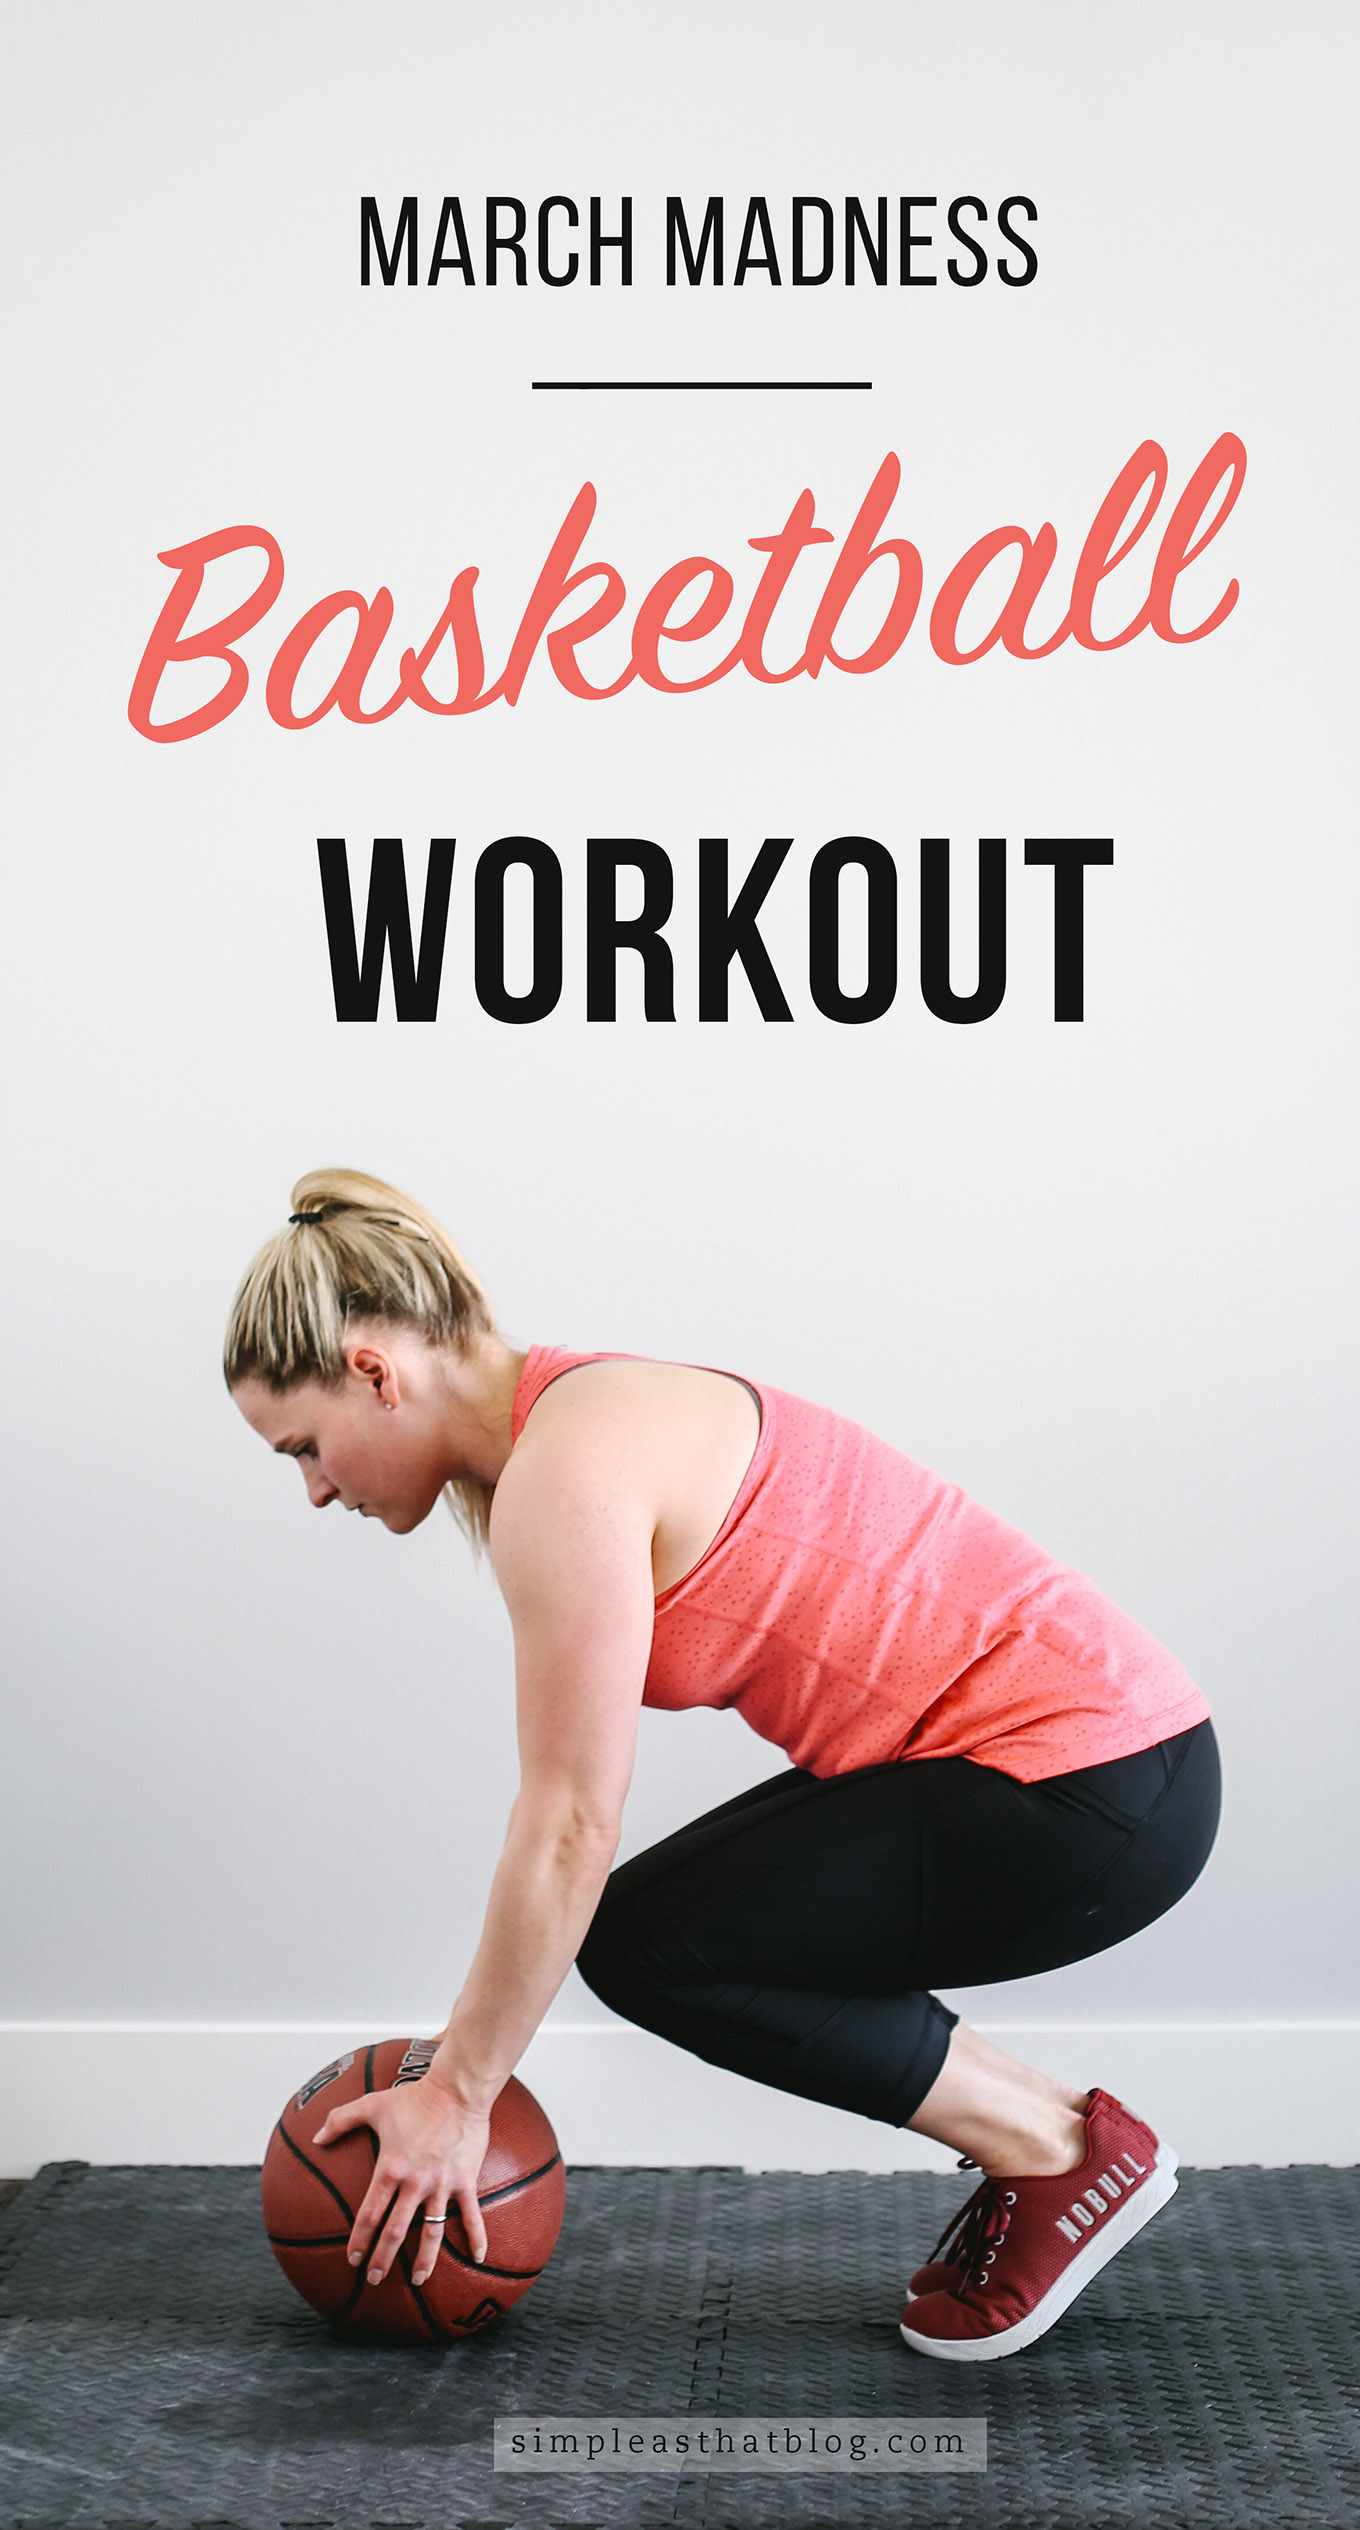 March Madness is right around the corner. Even if you're not a fan, you can still win big with this 30-minute basketball workout that challenges your stability, balance, and coordination.